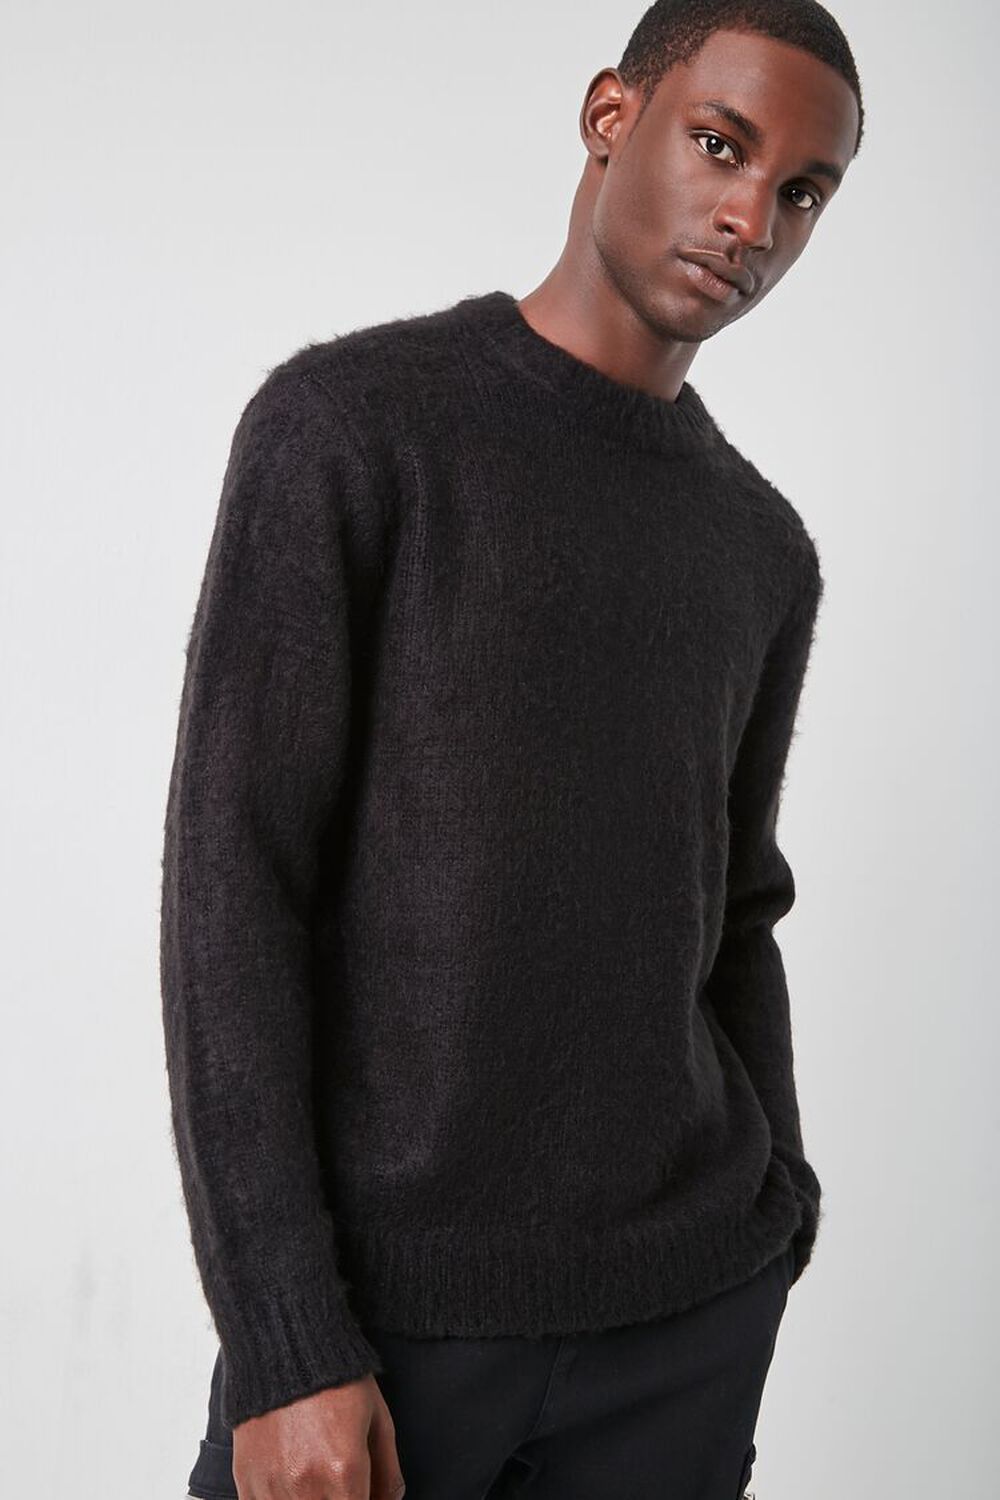 BLACK Brushed Purl Knit Sweater, image 1